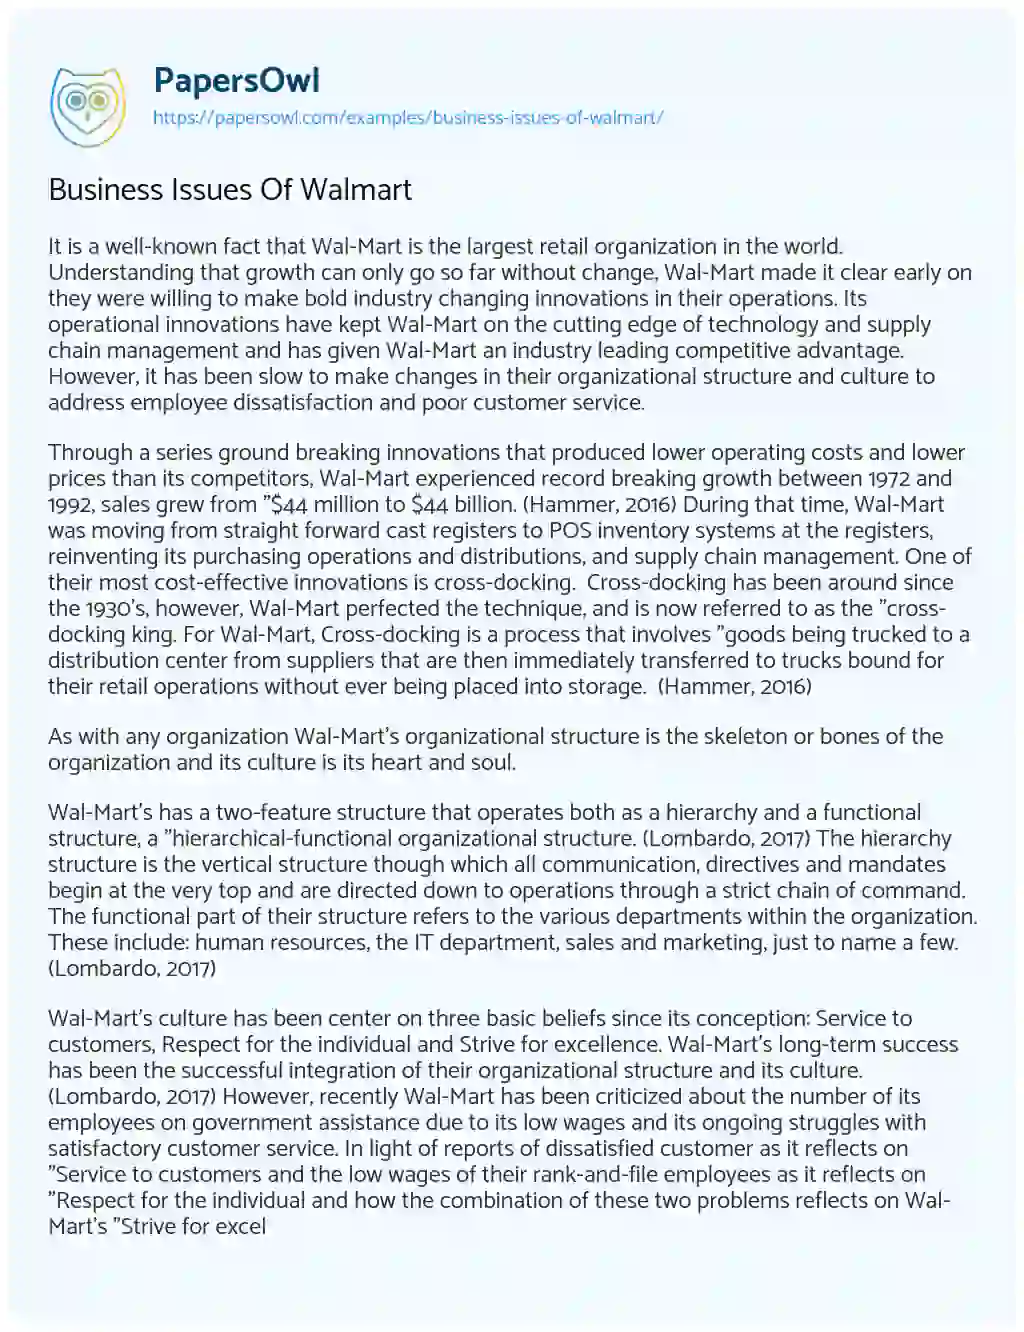 Business Issues of Walmart essay